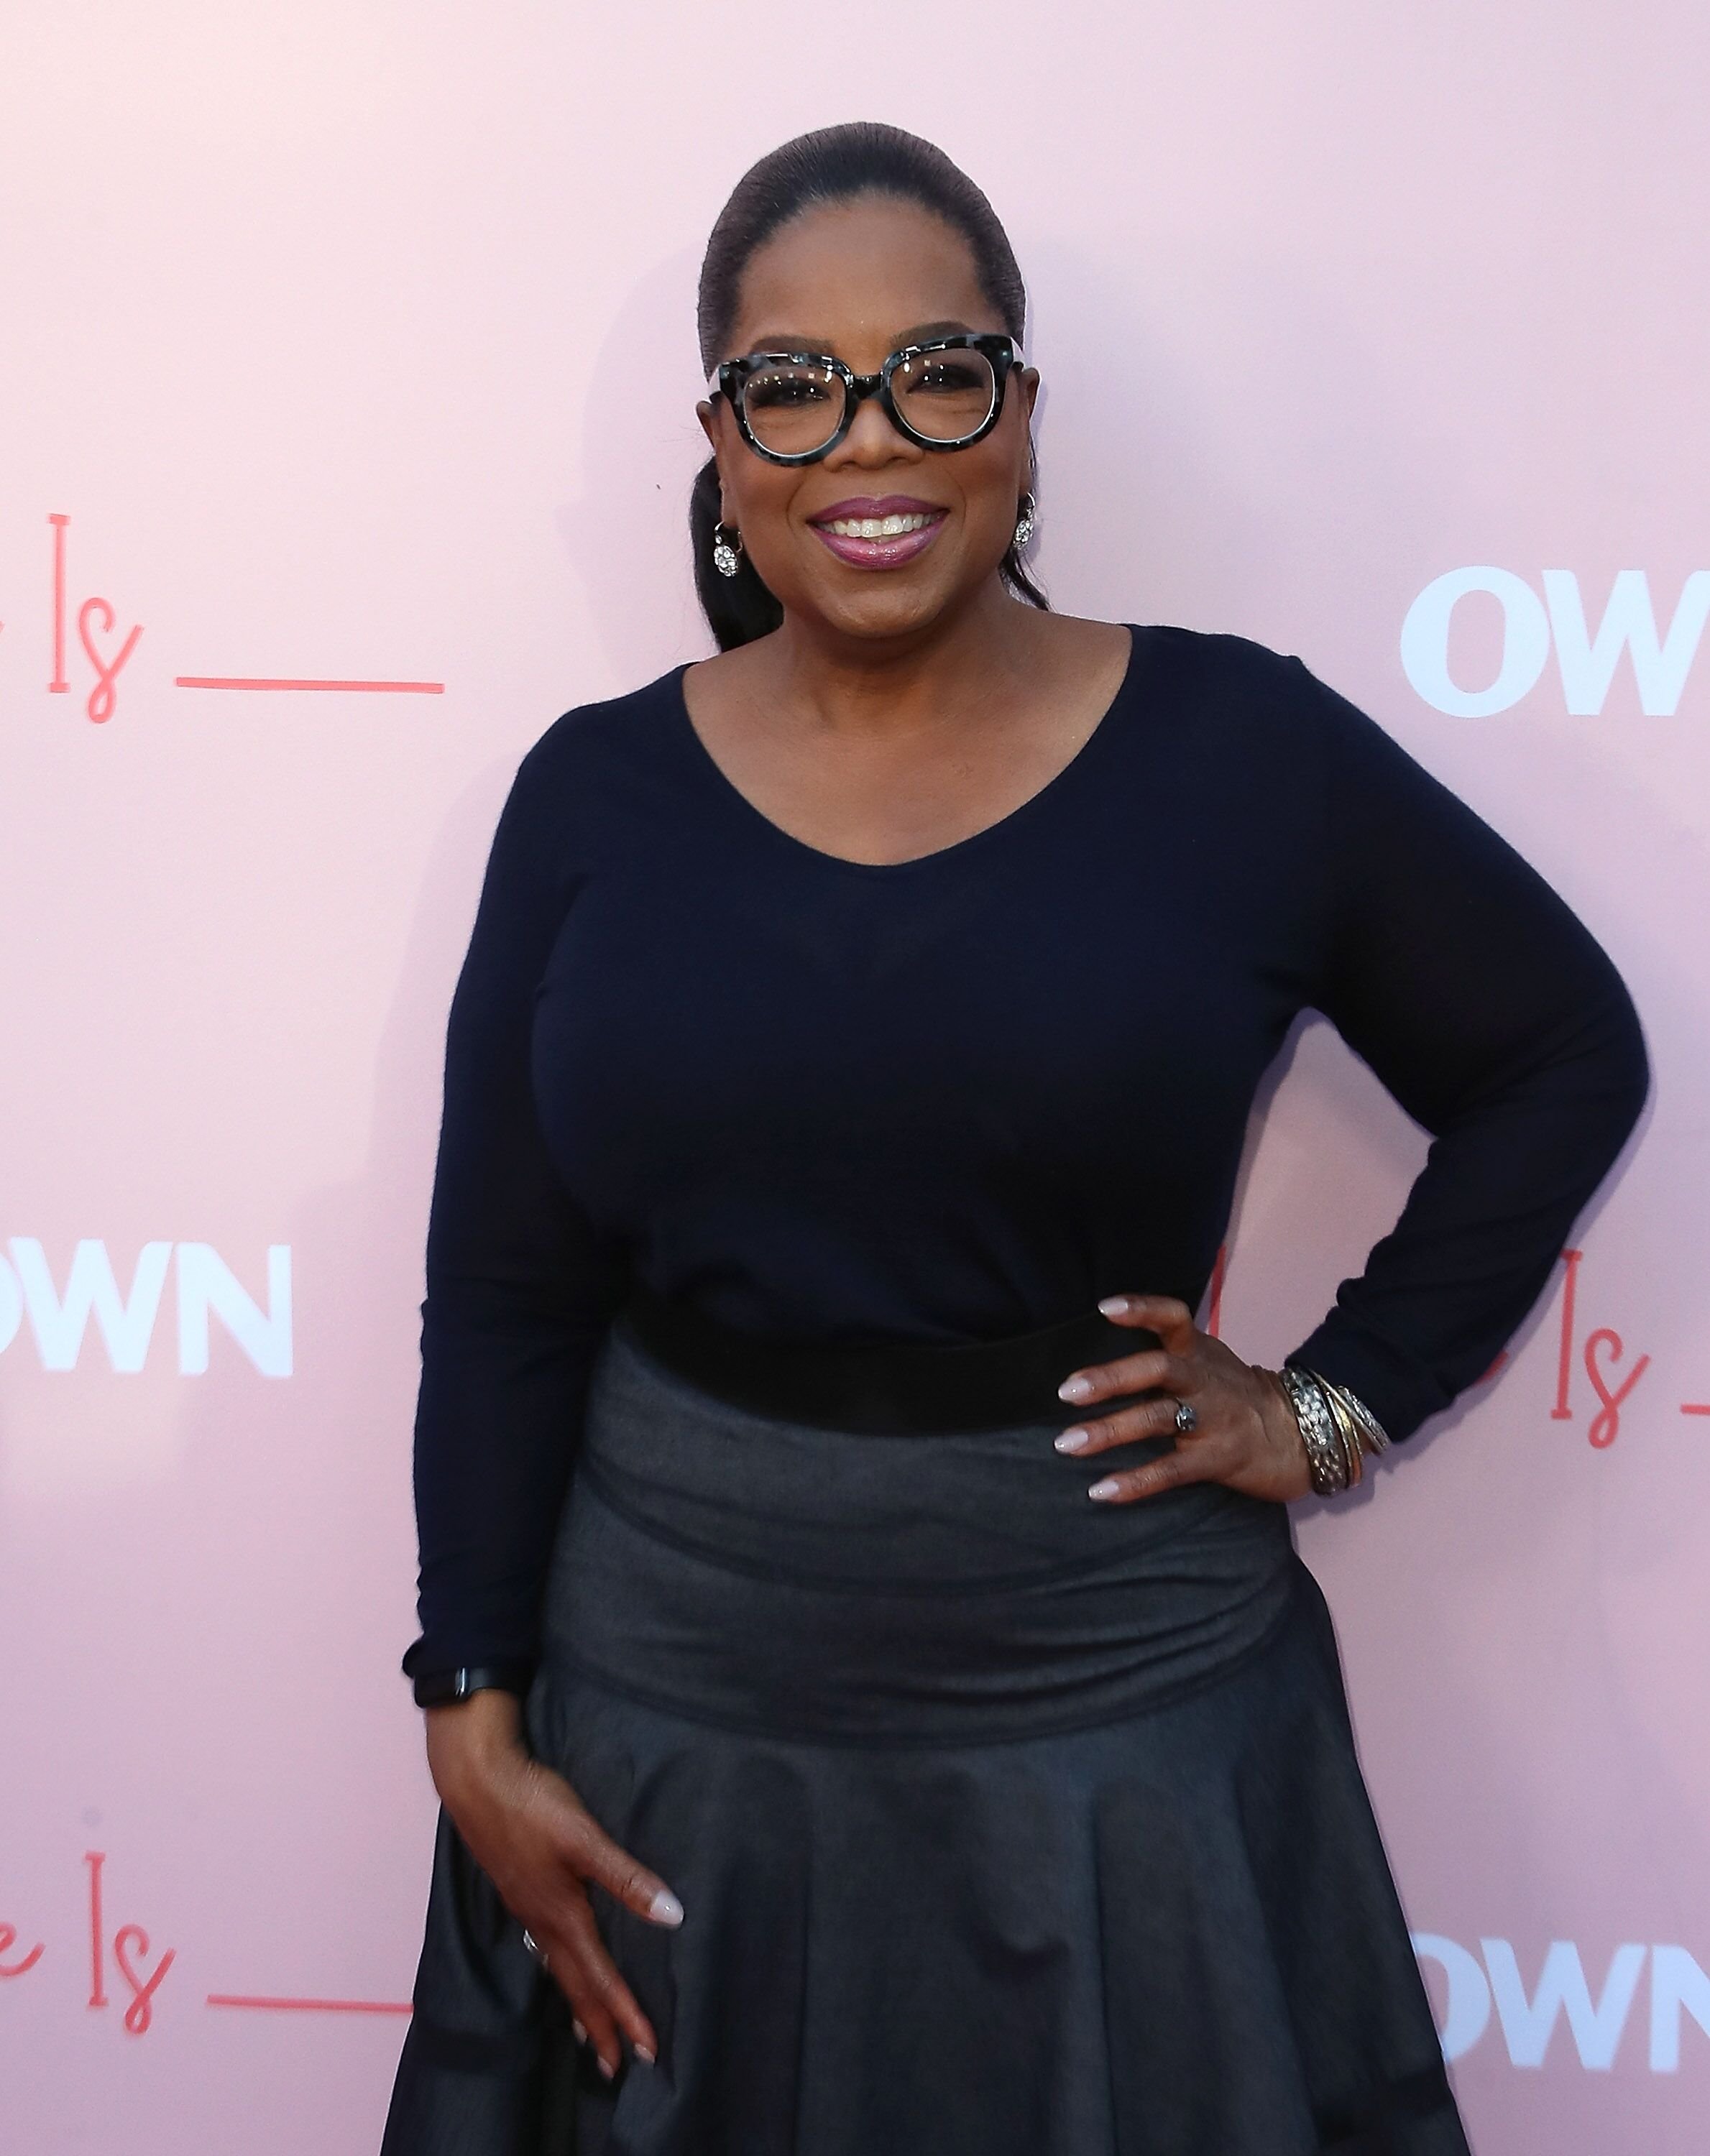 Actress Oprah Winfrey attends the premiere of OWN's "Love Is_" at NeueHouse Hollywood on June 11, 2018 | Photo: Getty Images